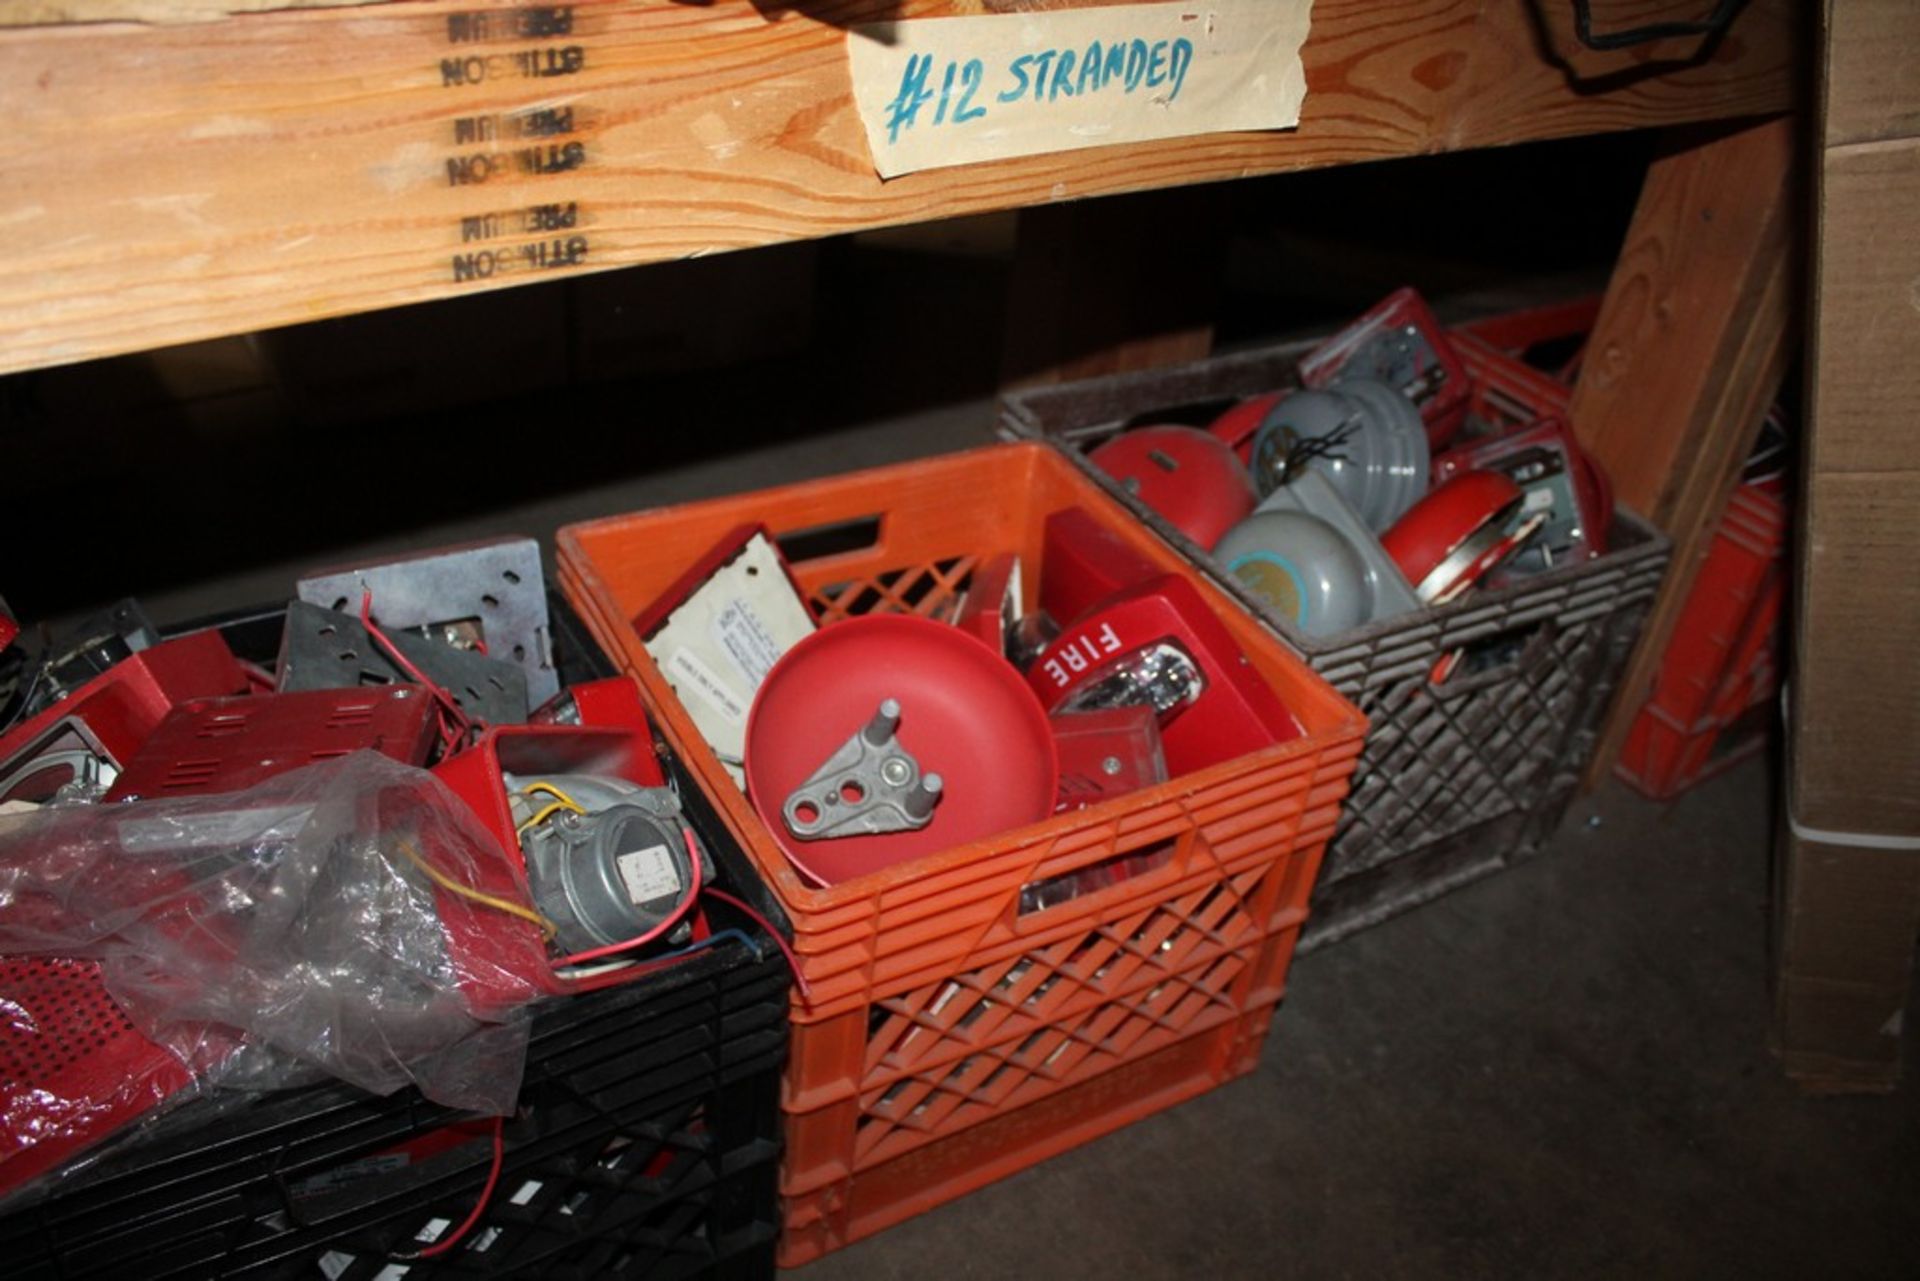 LARGE QUANTITY OF FIRE SAFETY COMPONENTS ON SHELF - Image 7 of 7